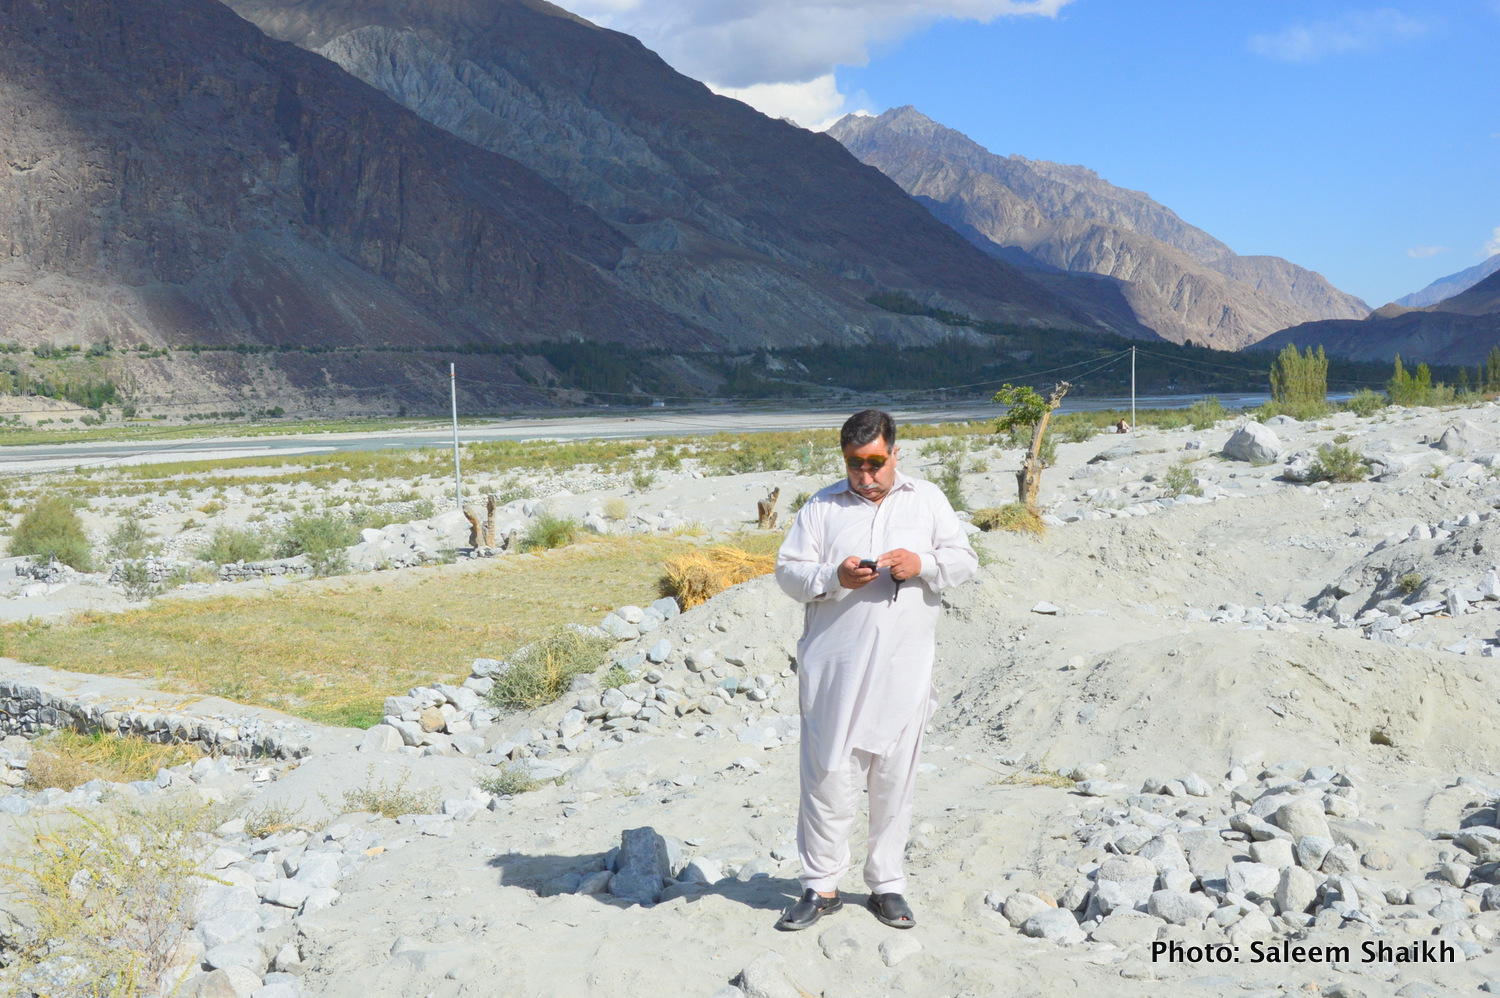 A farmer standing over what were once-fertile maize, potato and what fields now under the mud and heavy boulders washed down by the devastating 2010 flash flood in Damaas valley of Gilgit-Baltistan region’s scenic Ghizer district, Pakistan’s north. Photo credit: Saleem Shaikh